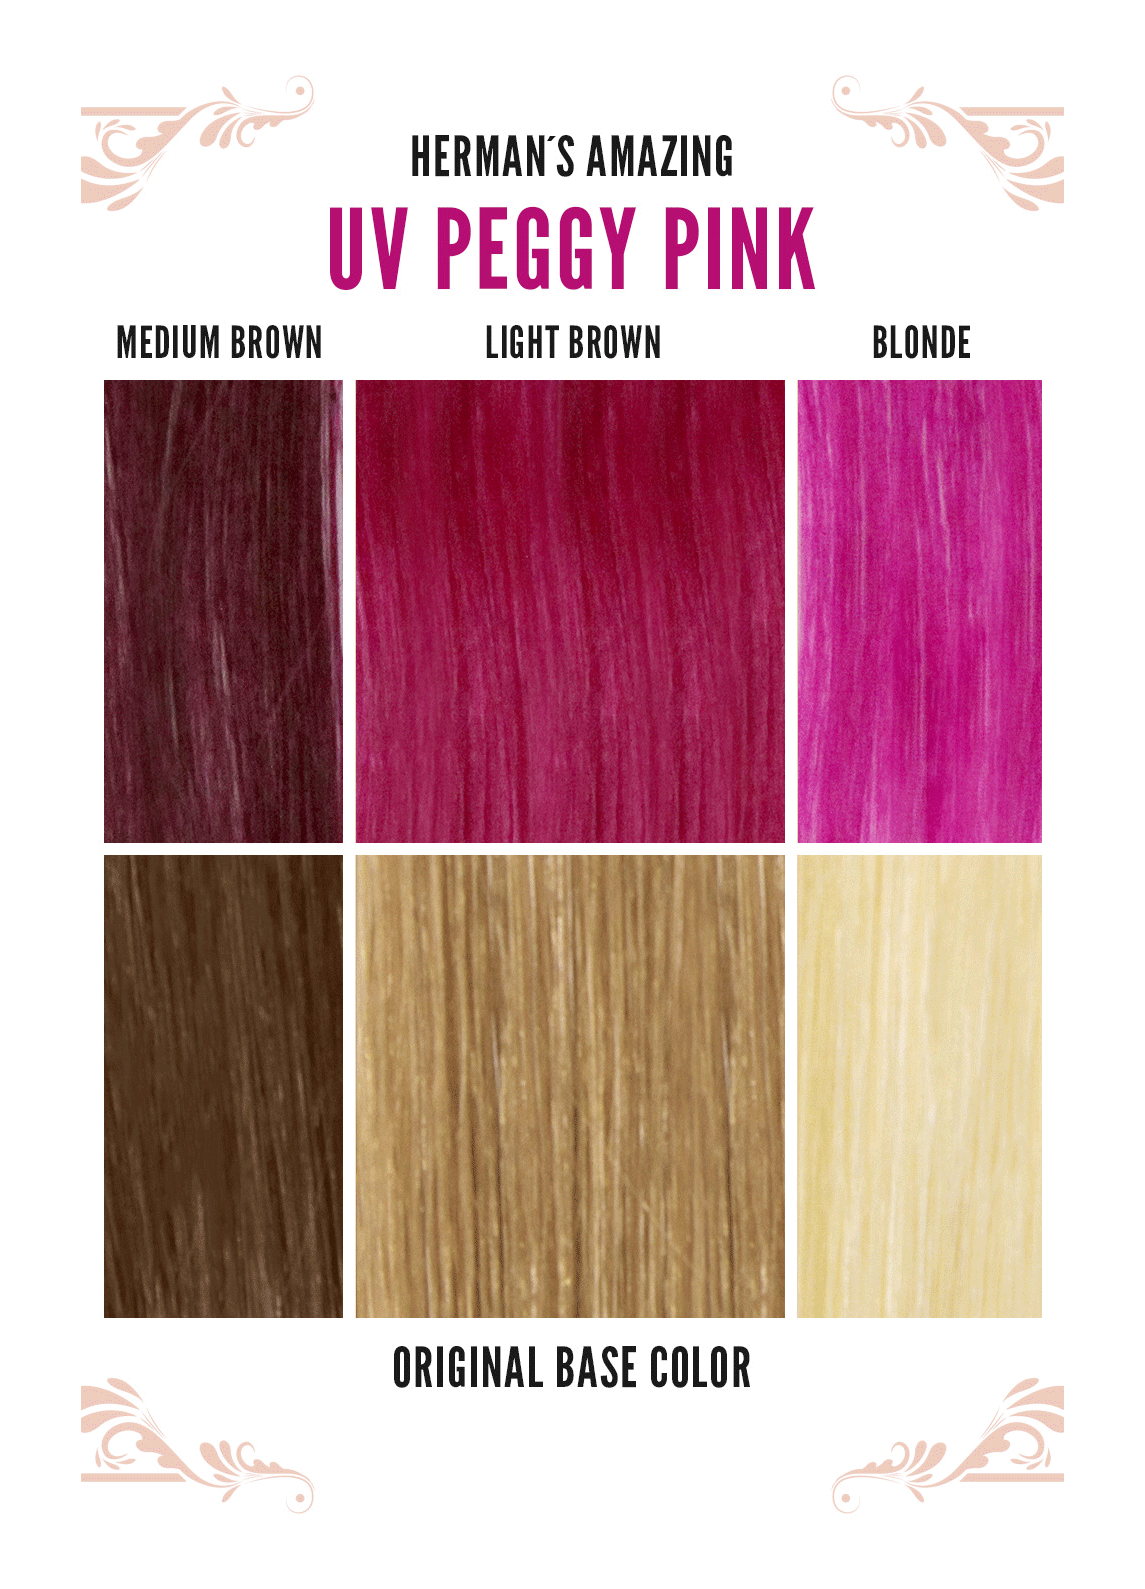 Herman's Amazing Direct Hair Colour - UV Peggy Pink - Kate's Clothing